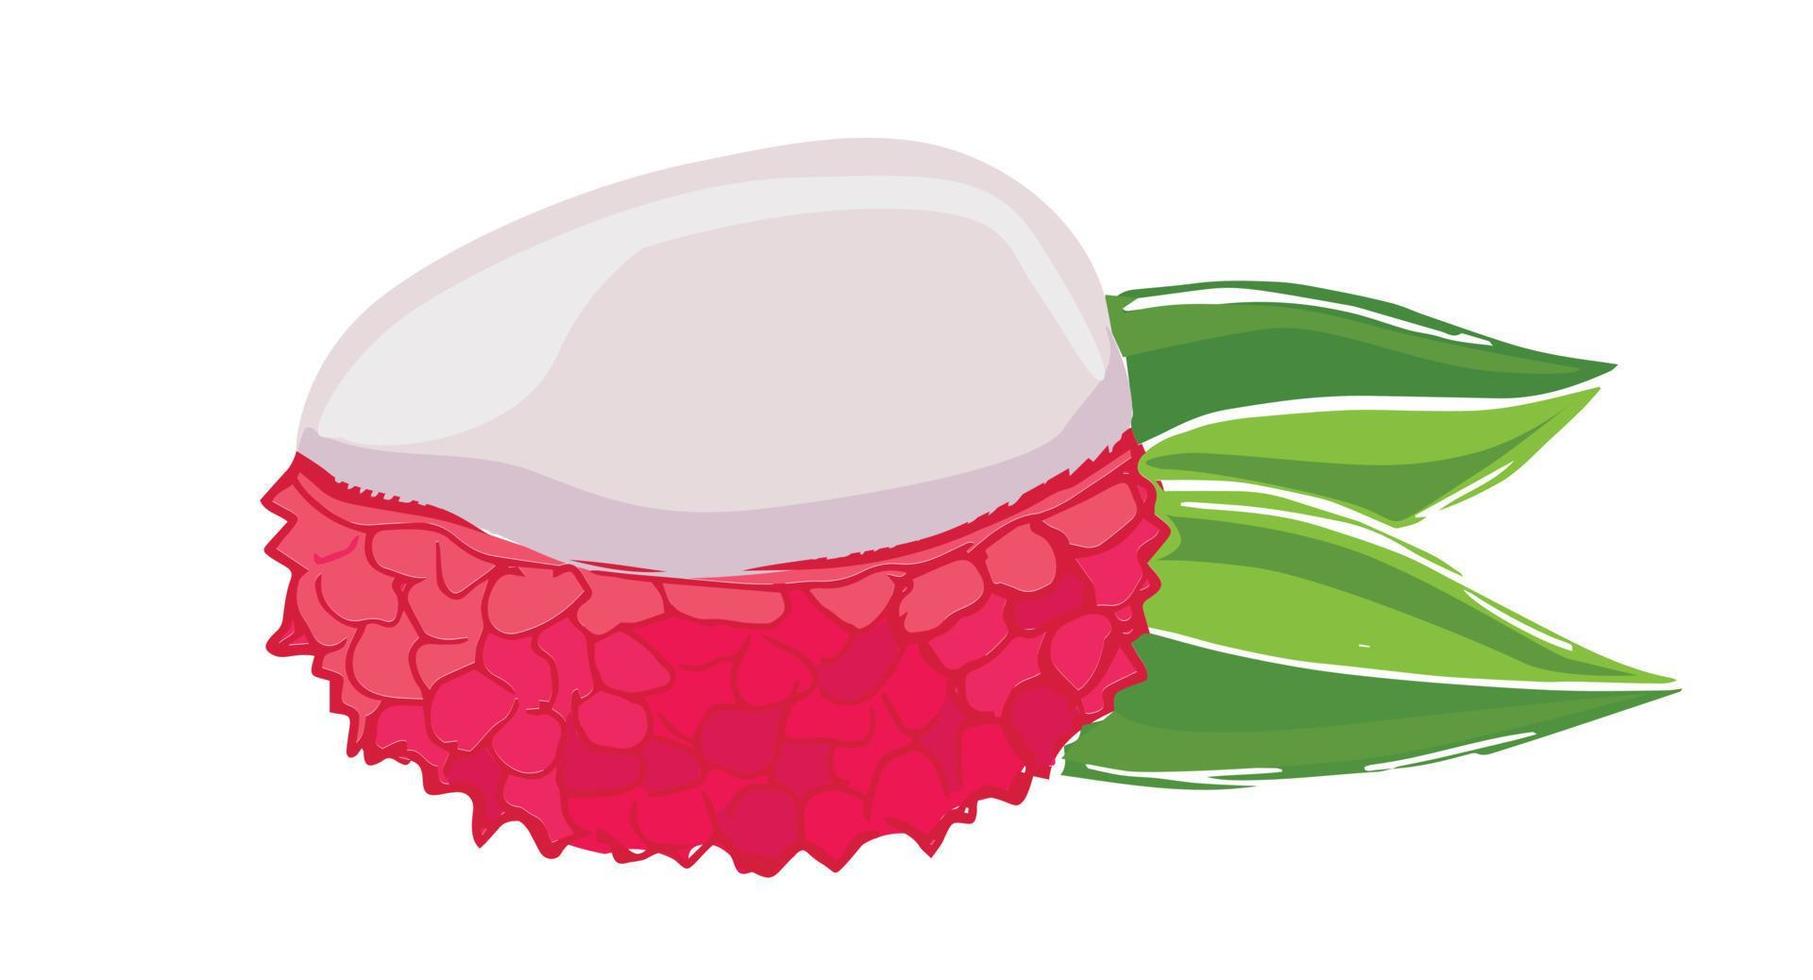 Lychee doodle drawings. Exotic fruit. Vector